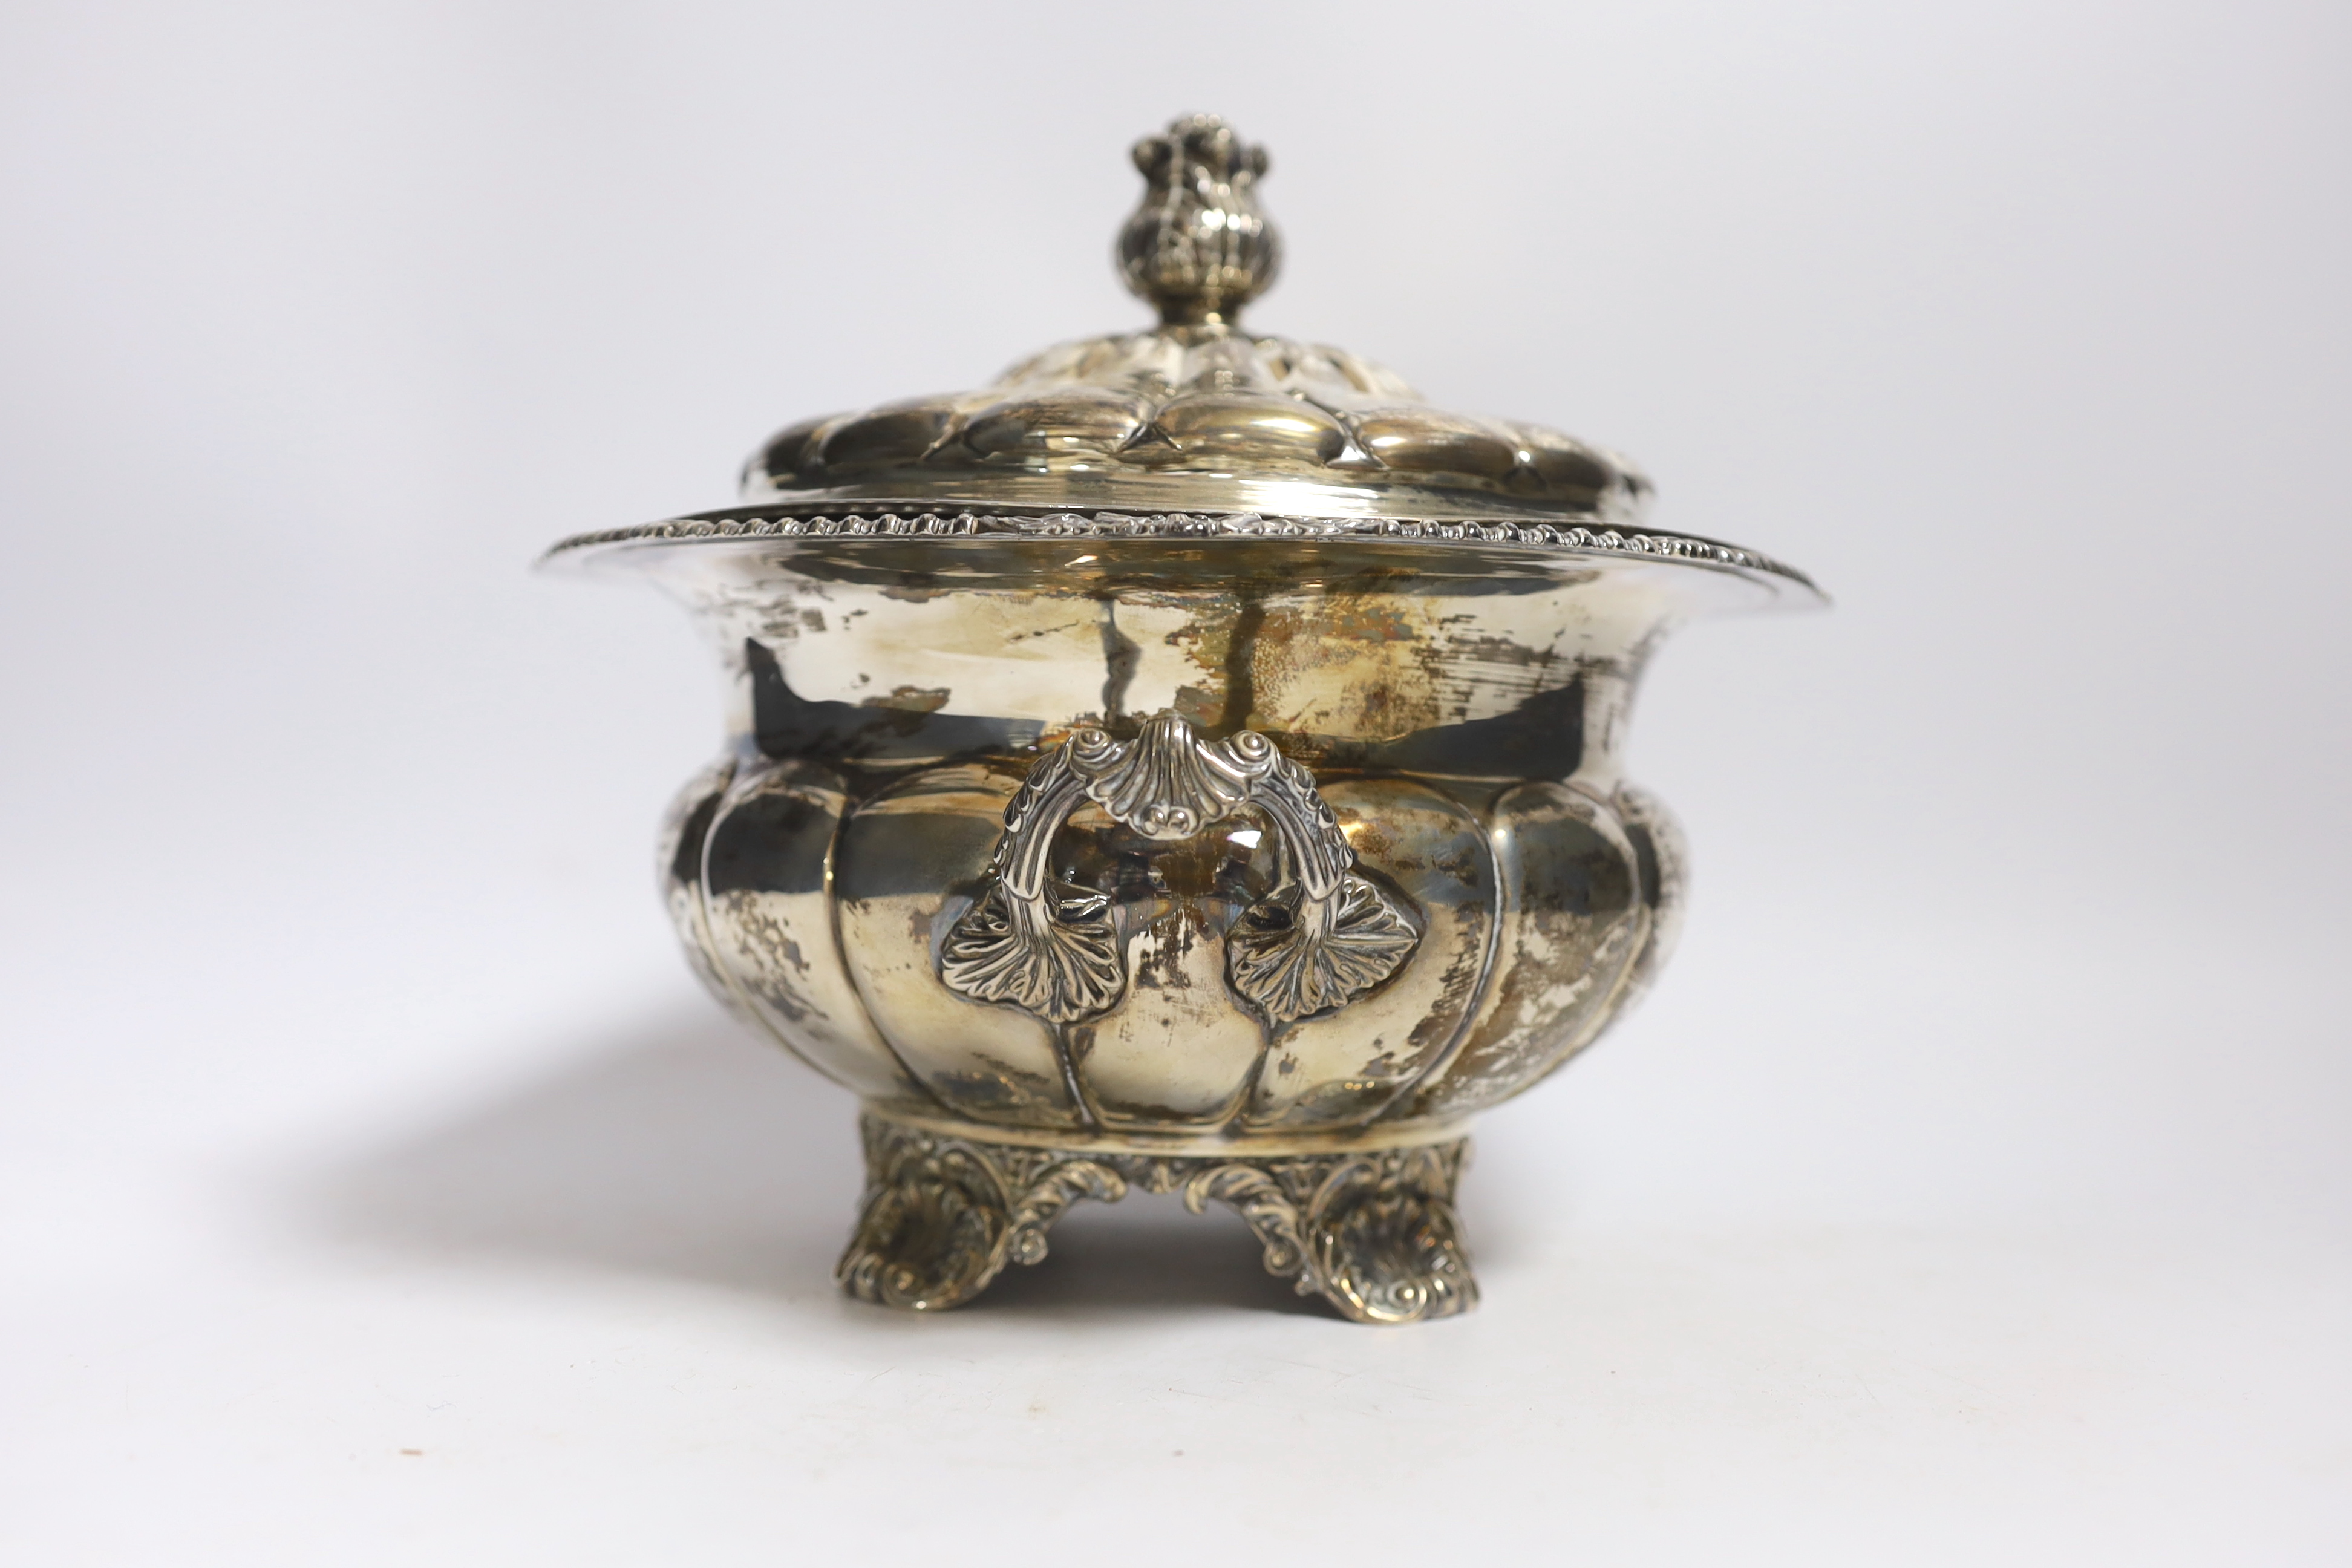 A George IV silver two handled vegetable tureen and cover, by Thomas Burwash, London, 1822 (marks on base rubbed), width over handles, 25cm, 36.5oz.